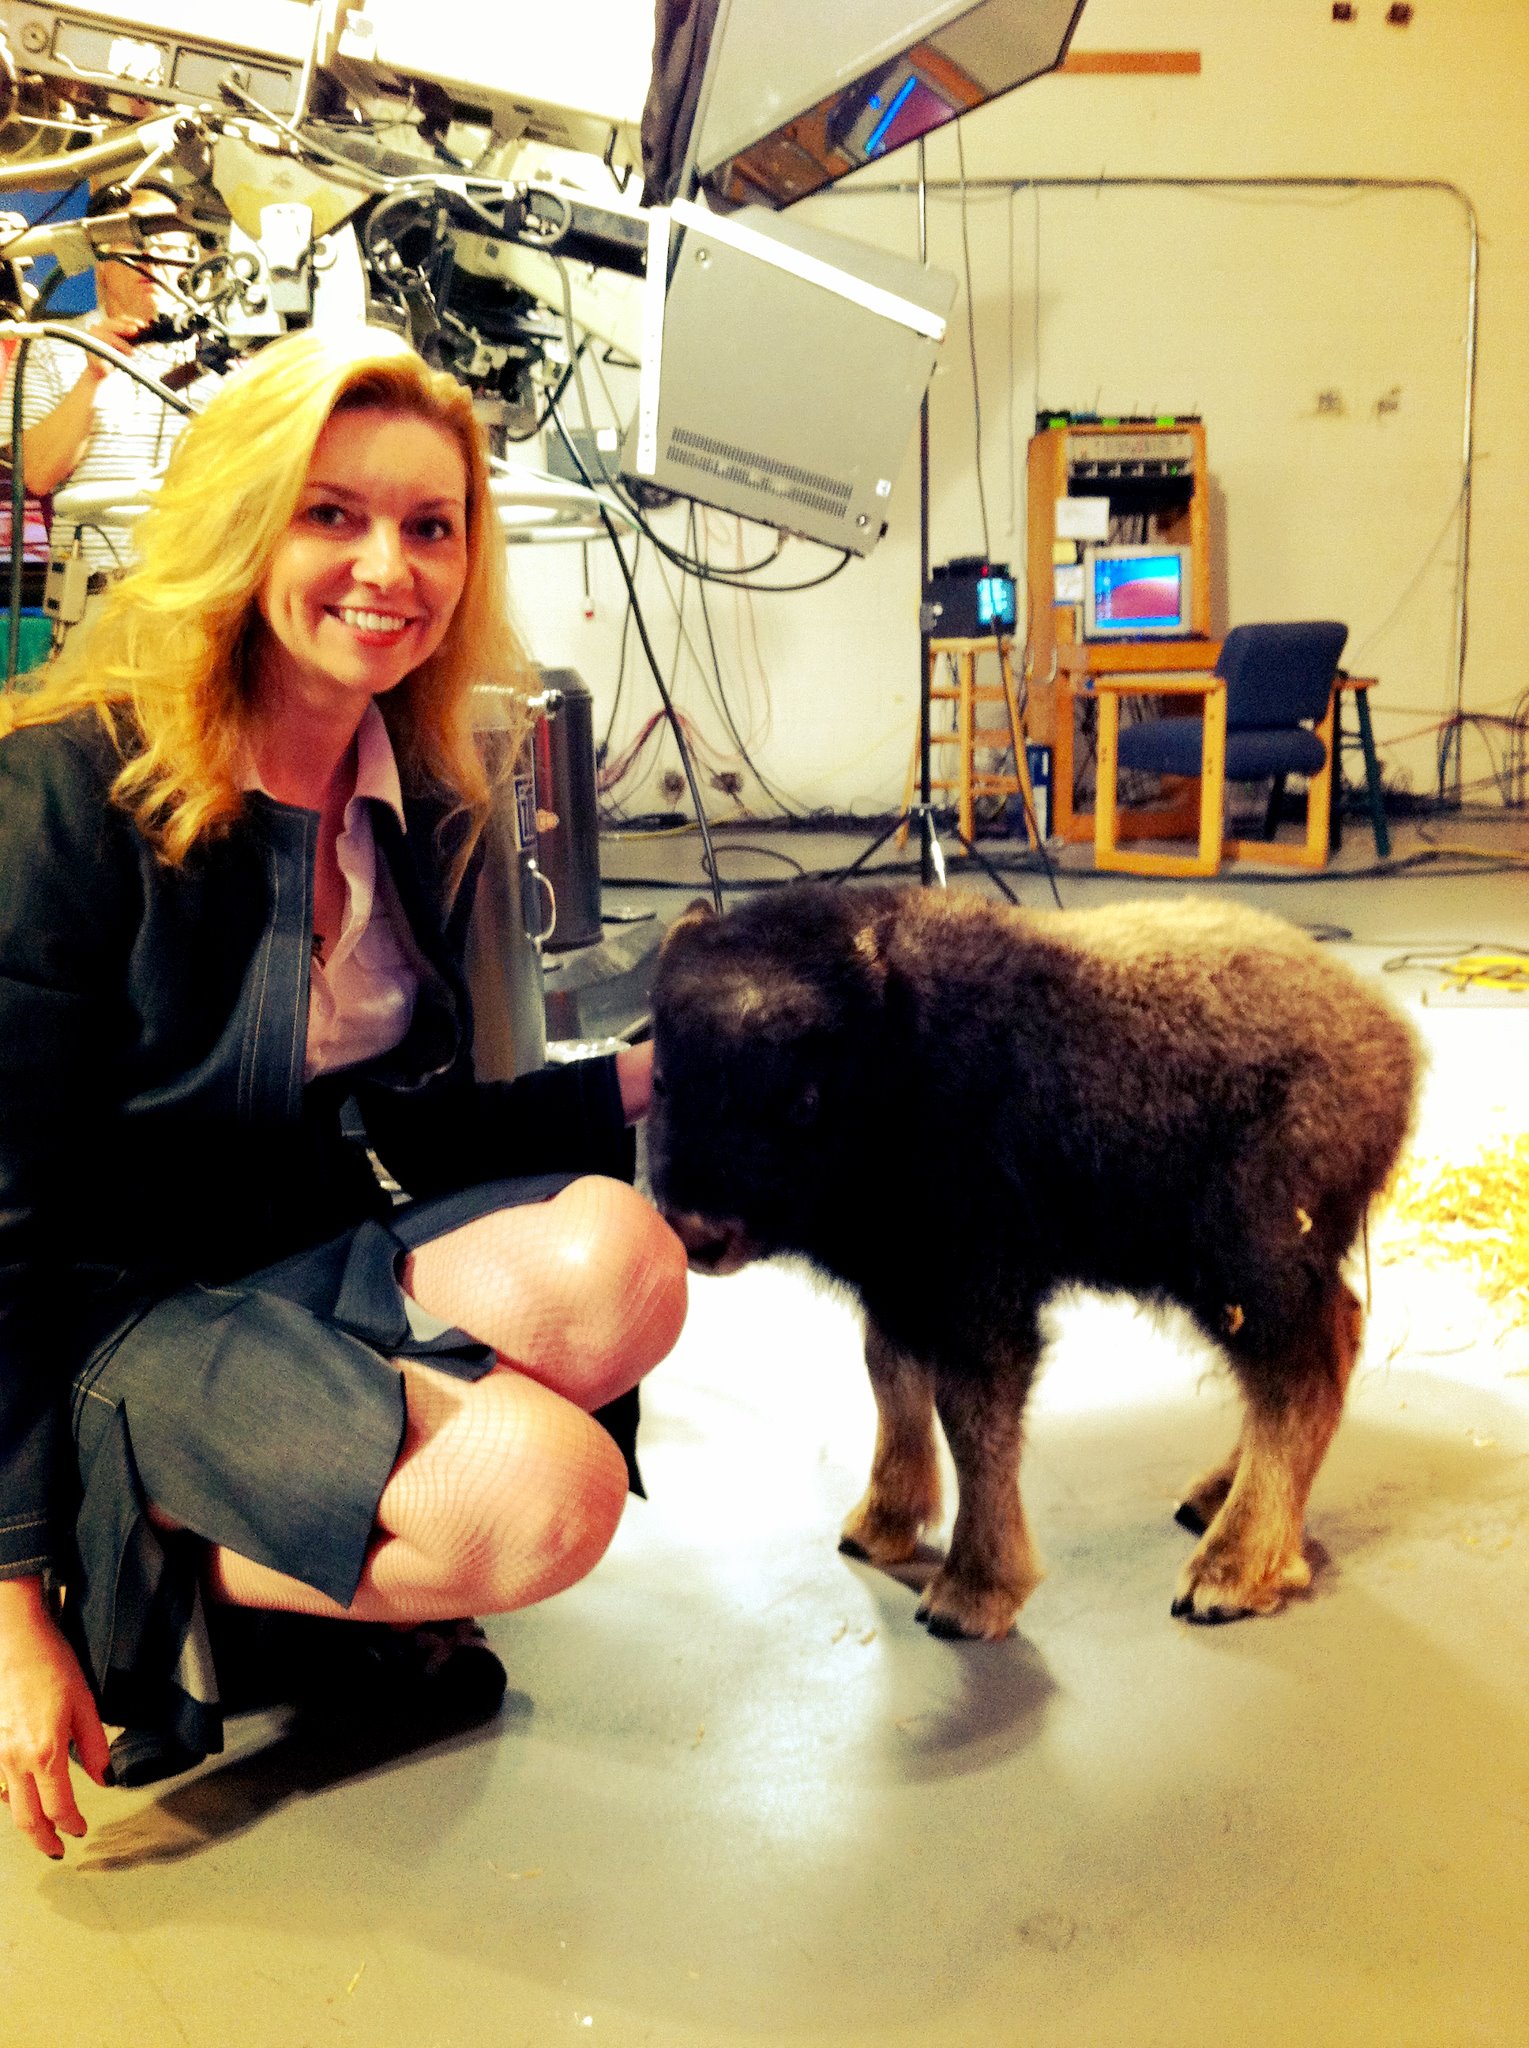 Works well with animals, even the small fuzzy ones. In this case, a three week old musk ox.